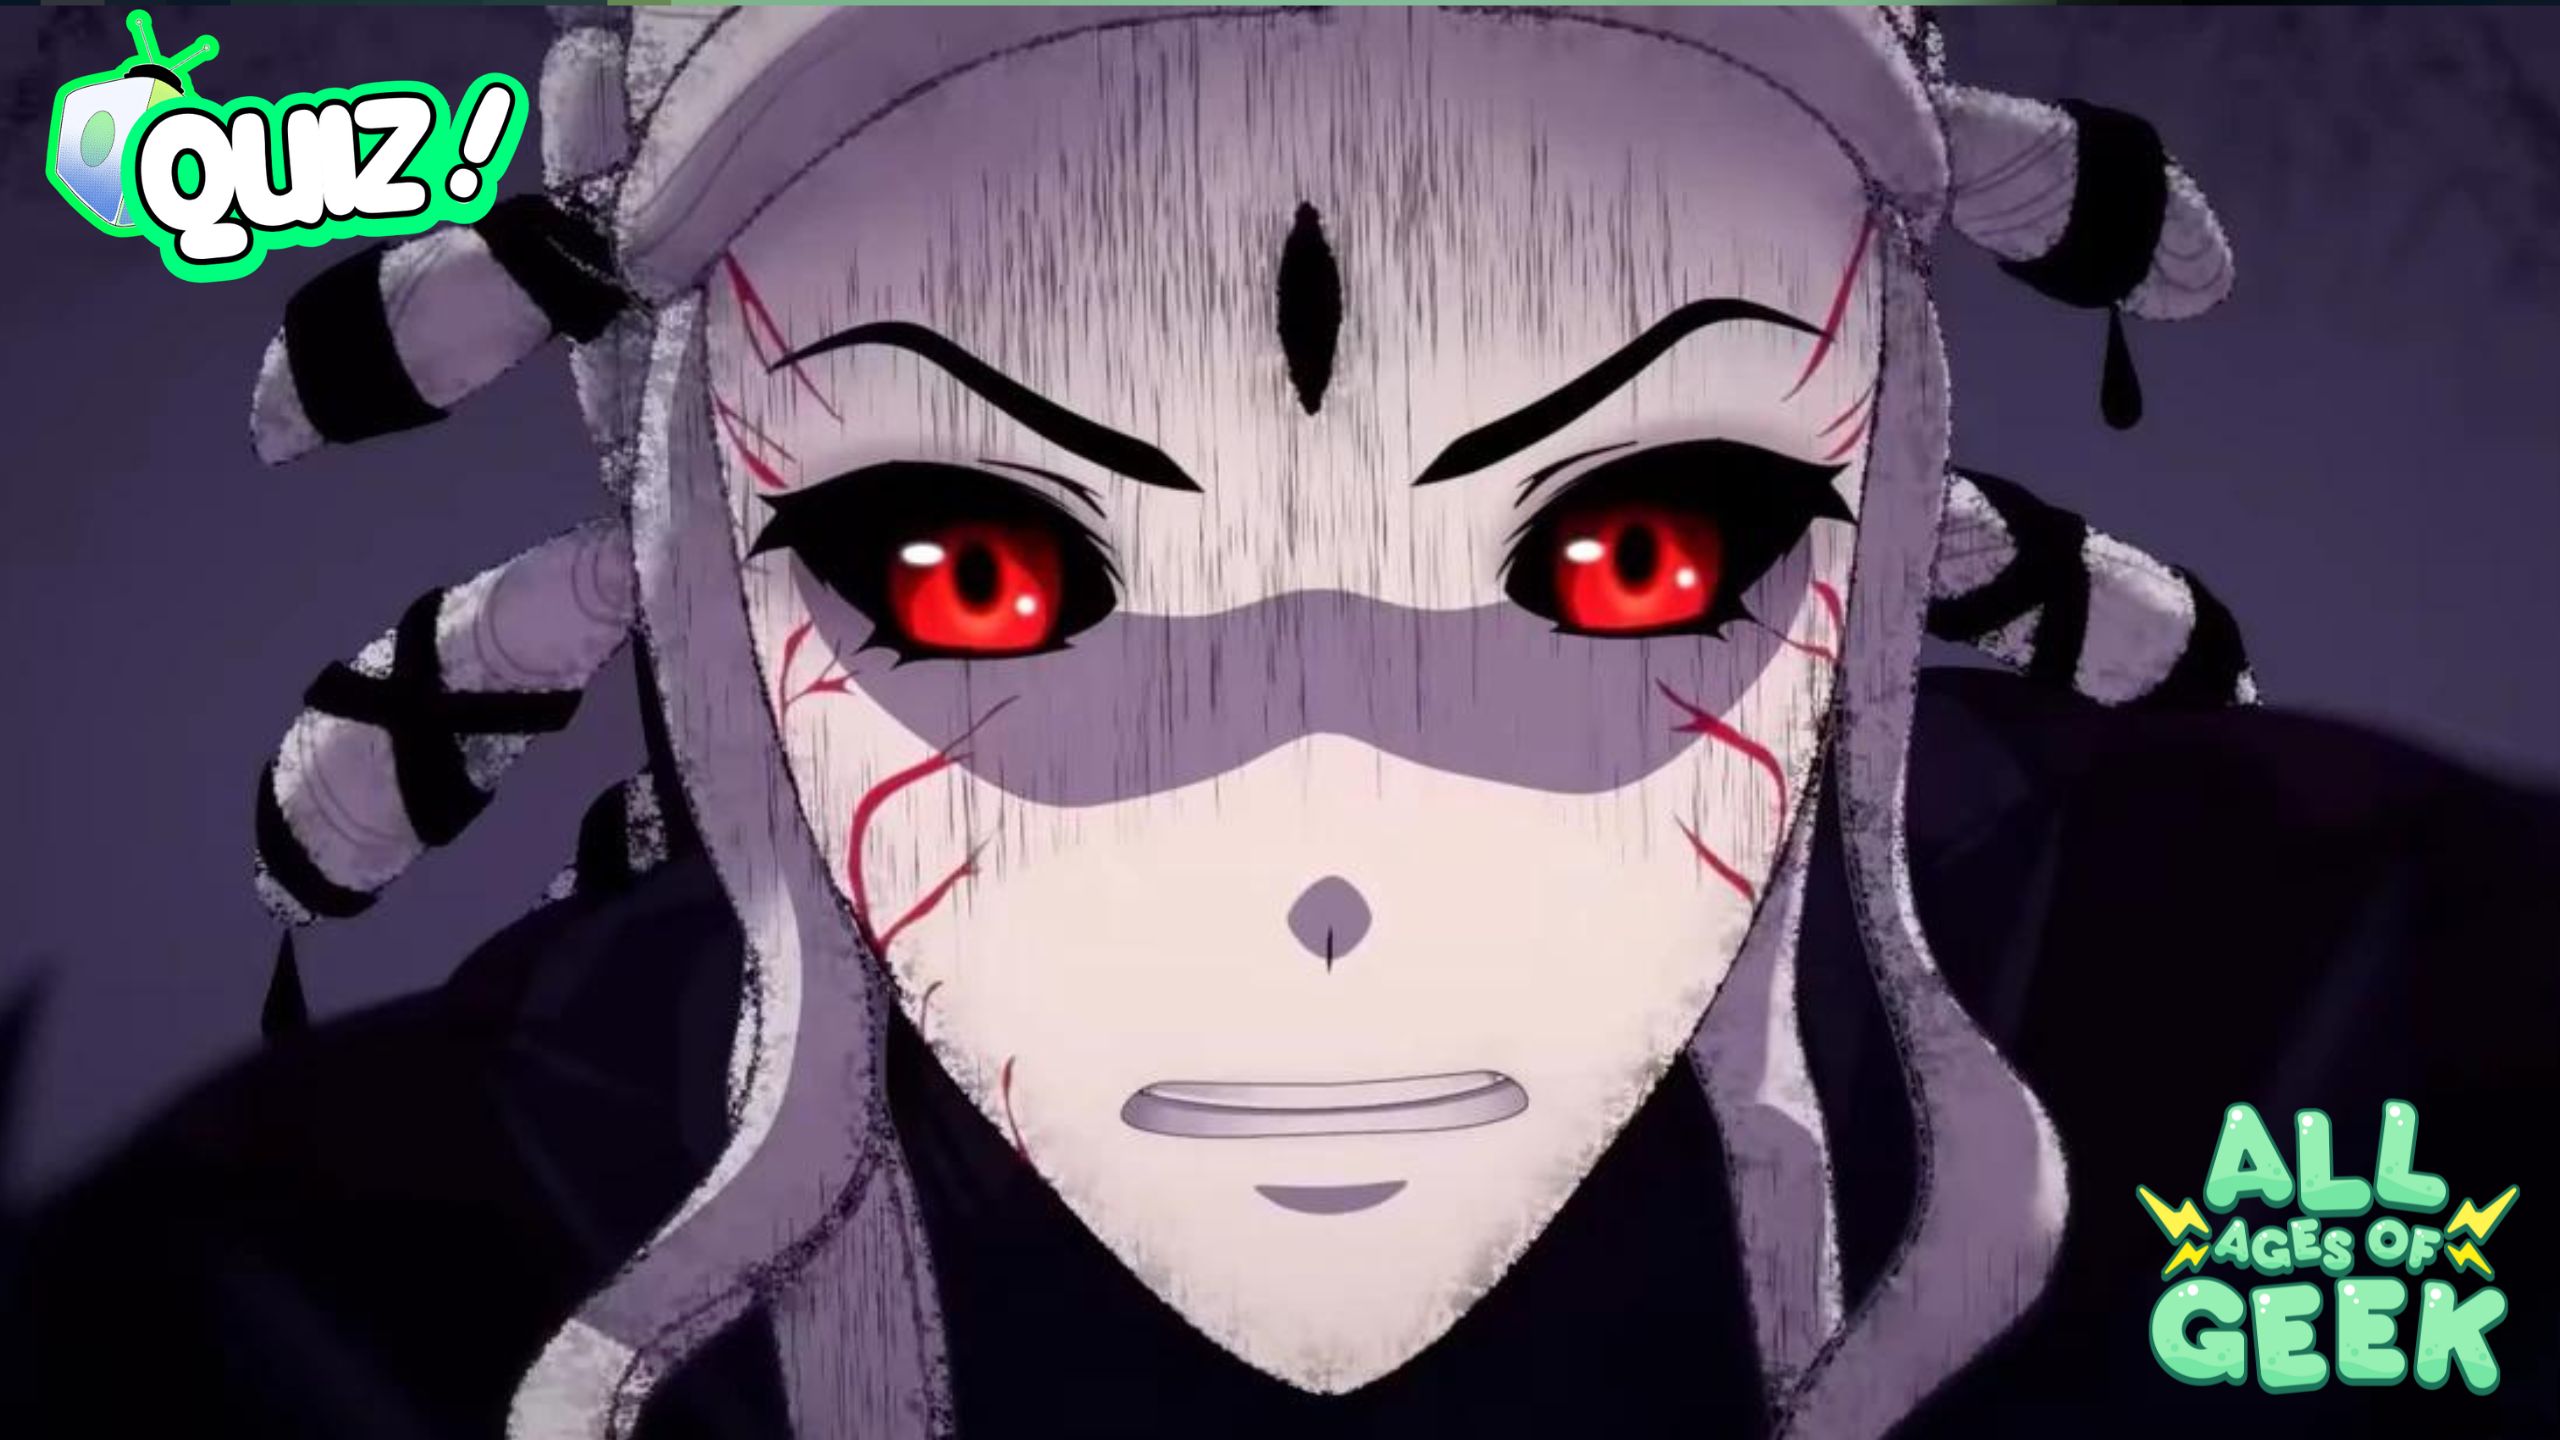 "A close-up of Salem, a character from RWBY, showing her red eyes and a menacing expression. This image is featured on All Ages of Geek and includes their logo."